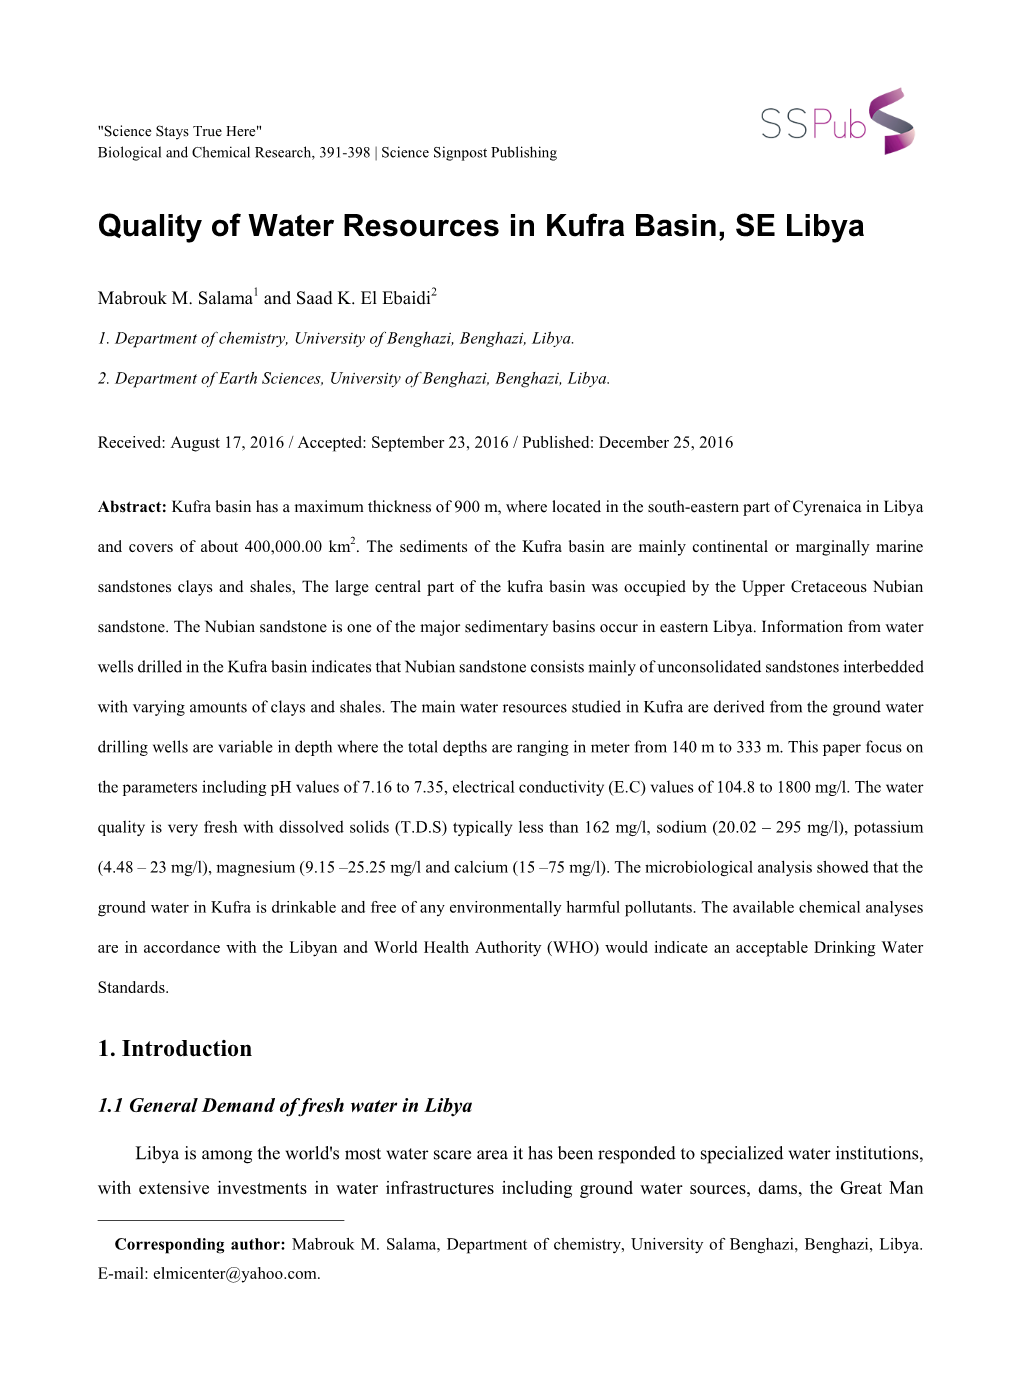 Quality of Water Resources in Kufra Basin, SE Libya